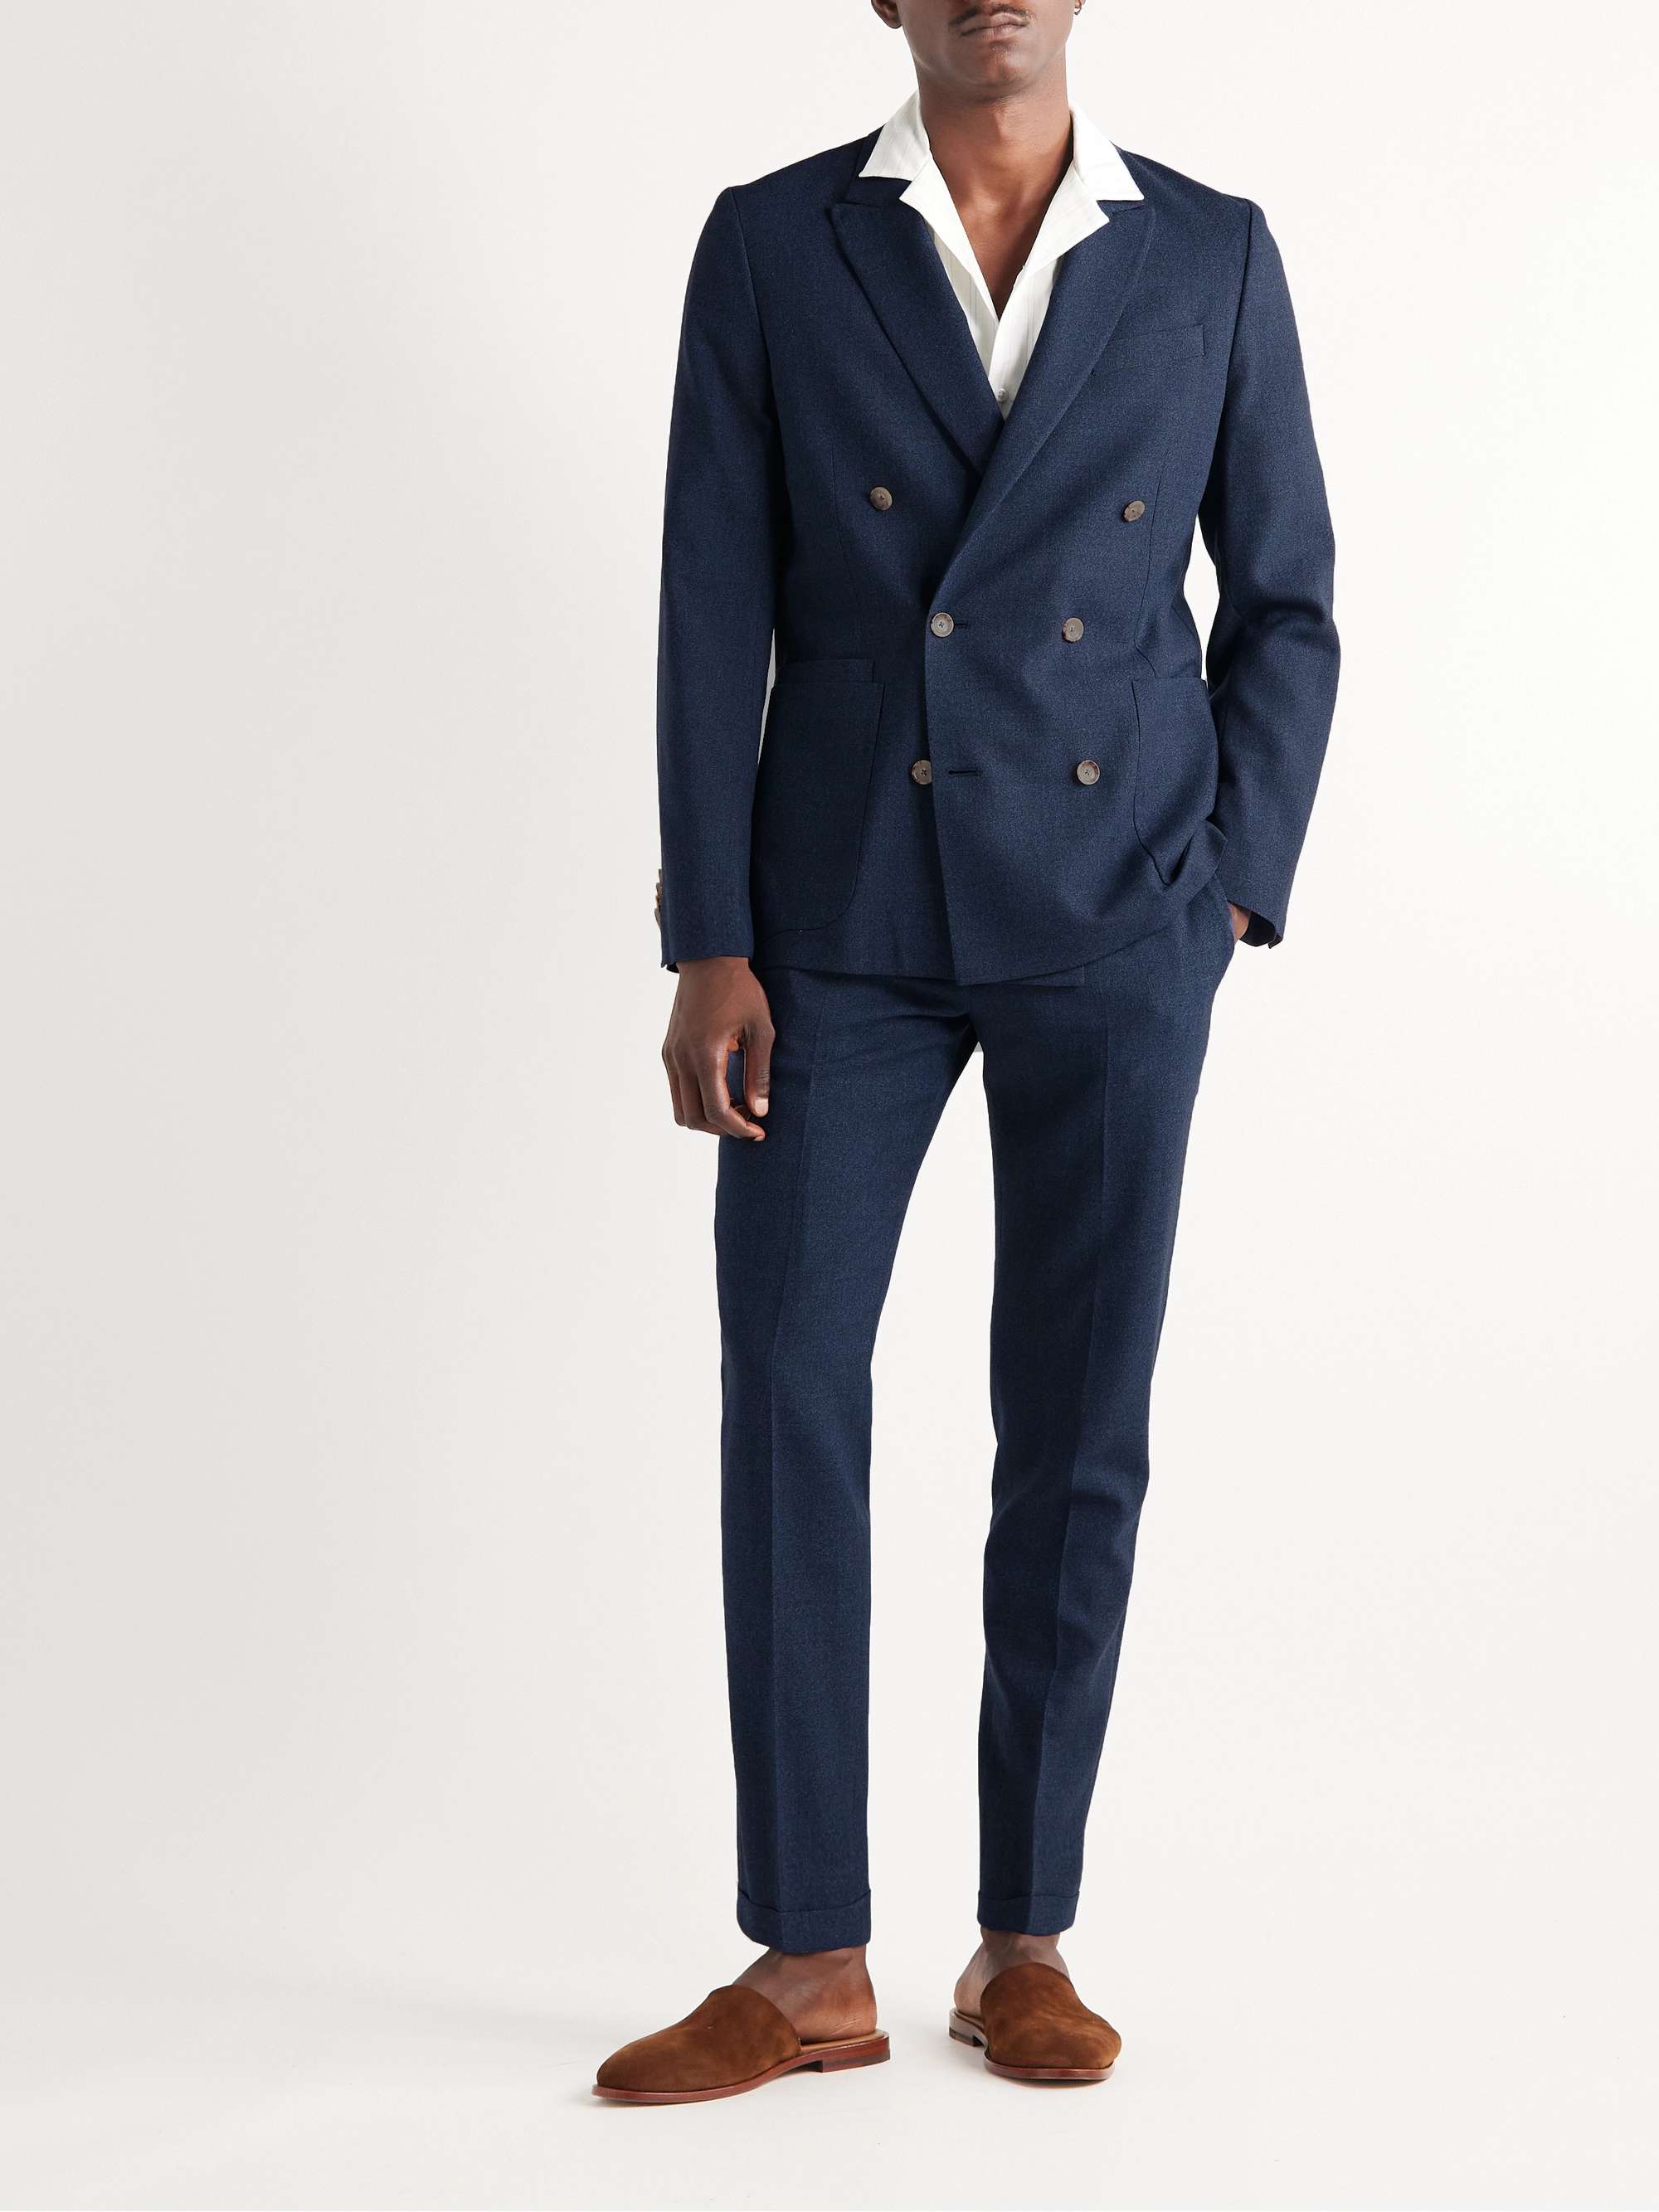 PAUL SMITH Slim-Fit Double-Breasted Unstructured Virgin Wool Suit Jacket |  MR PORTER